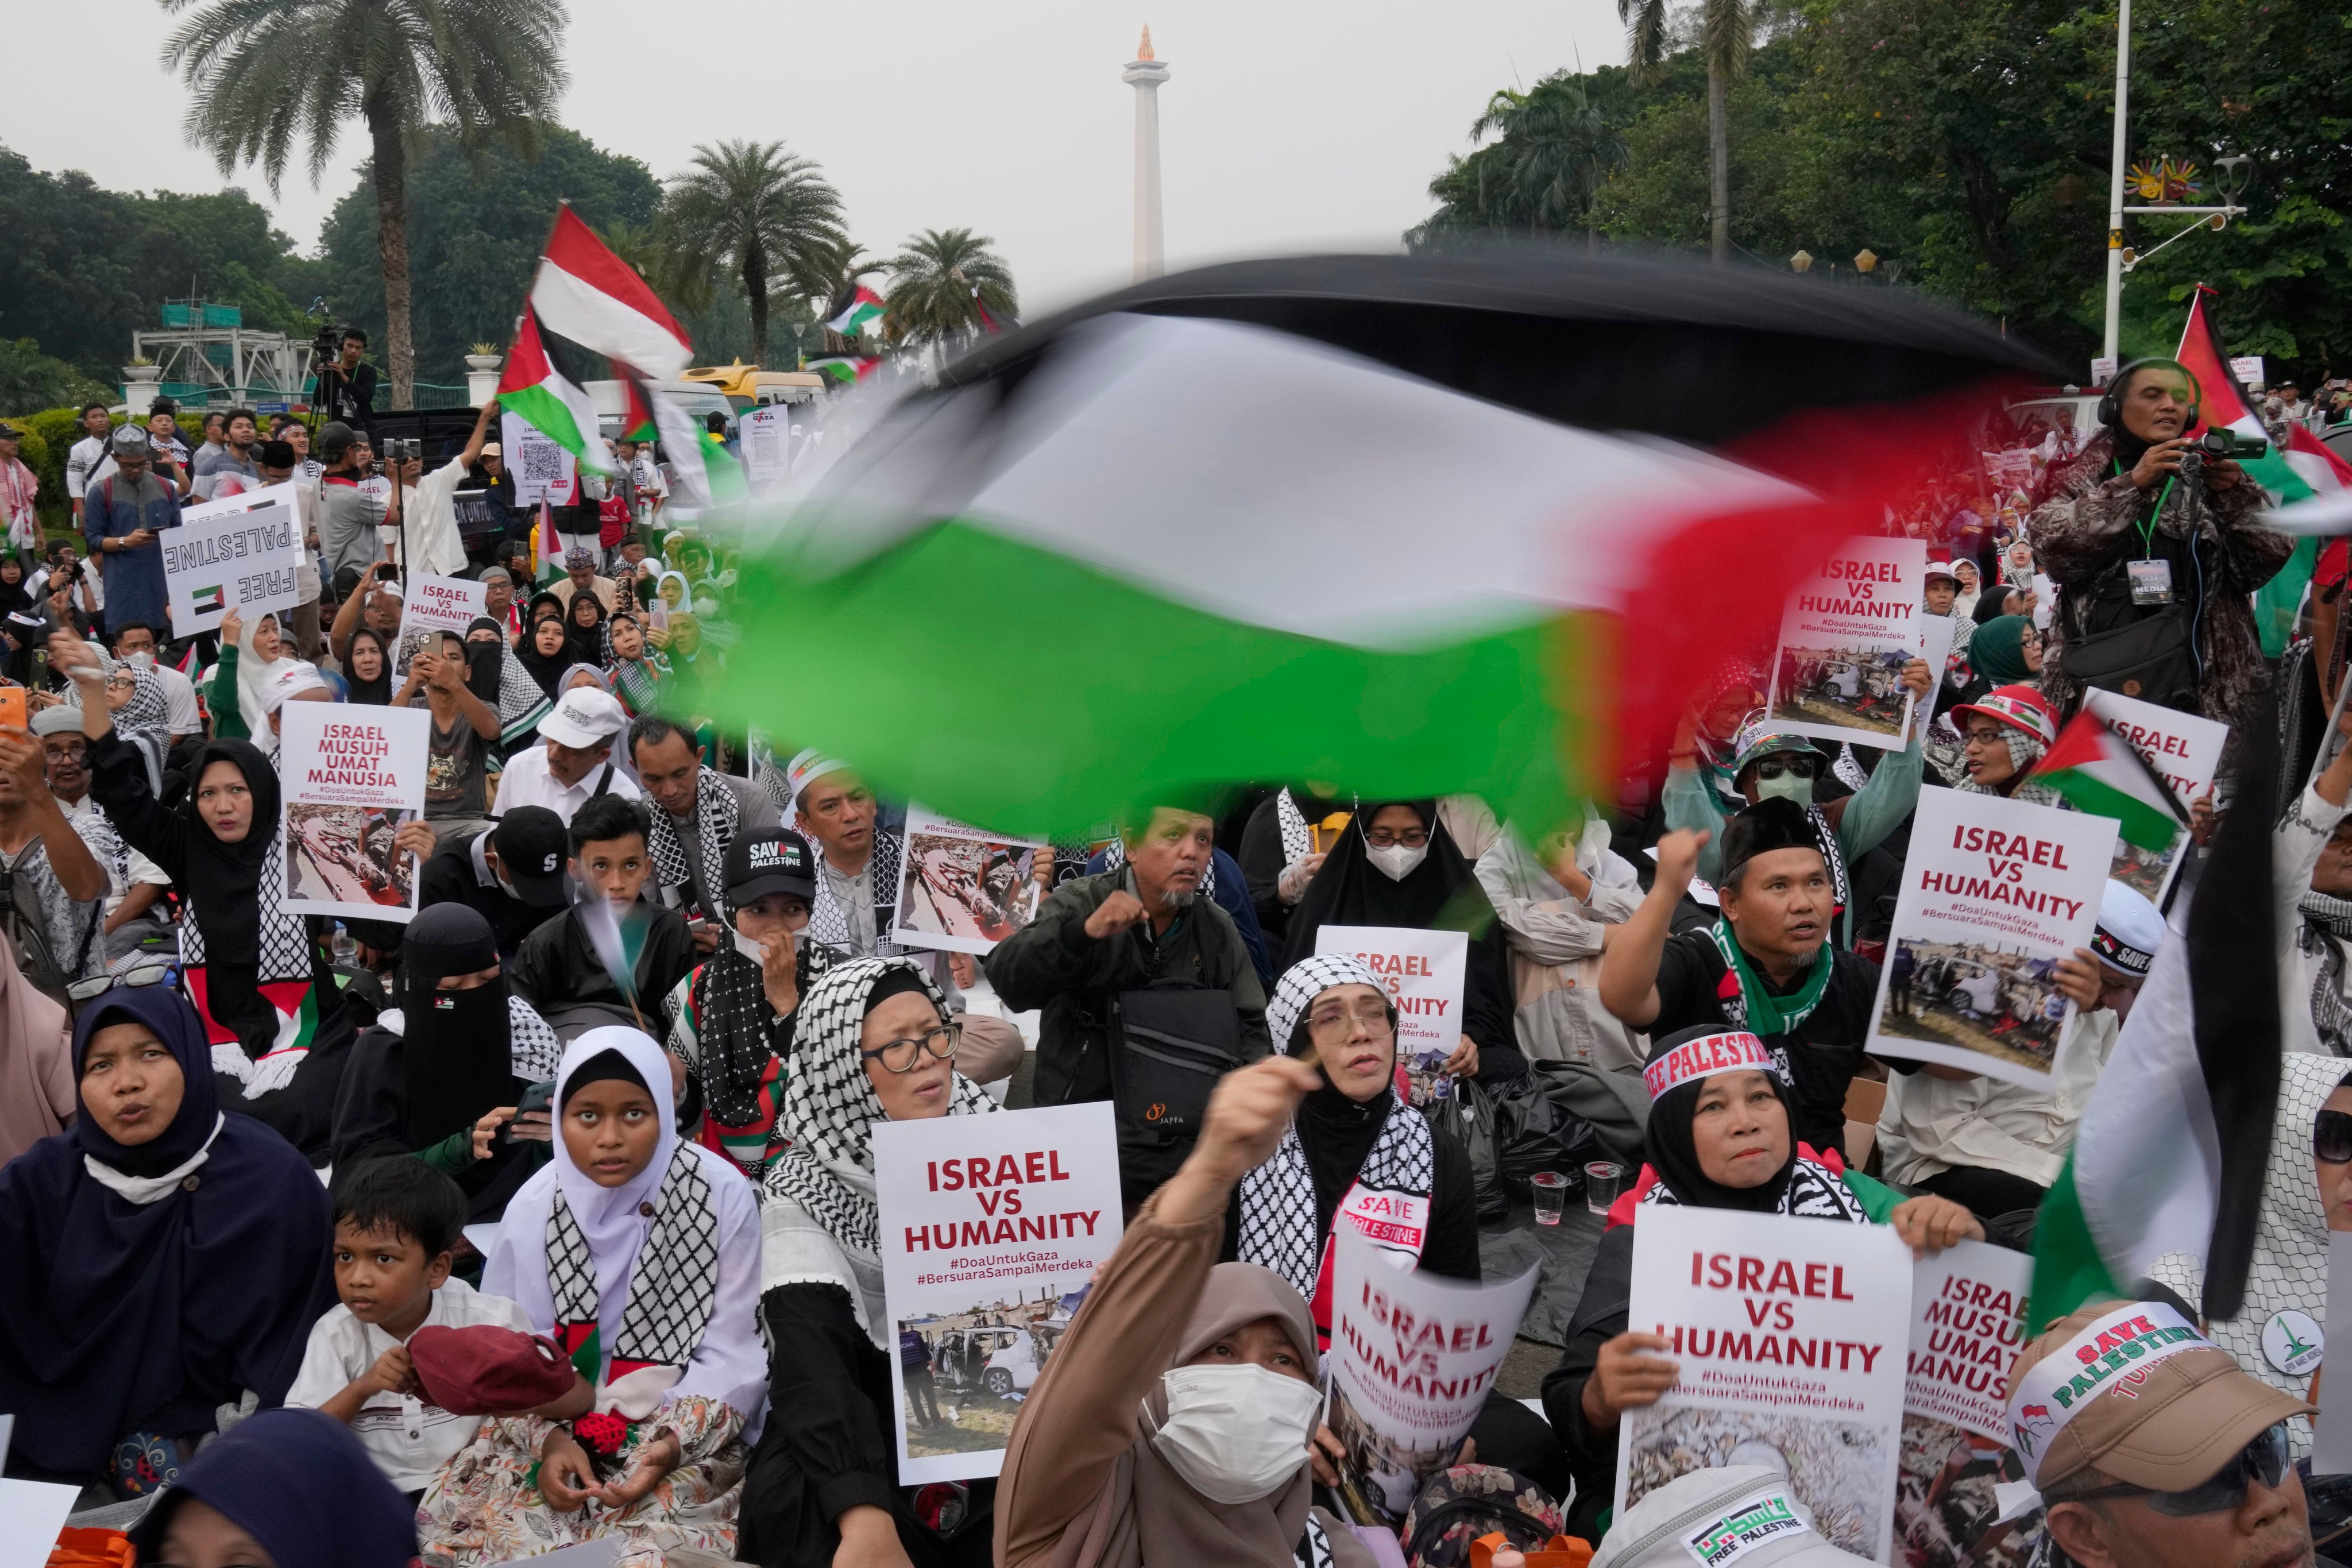 Protesters wave Palestinian flags during a rally in Jakarta earlier this month in support of Palestinians in Gaza. Photo: AP